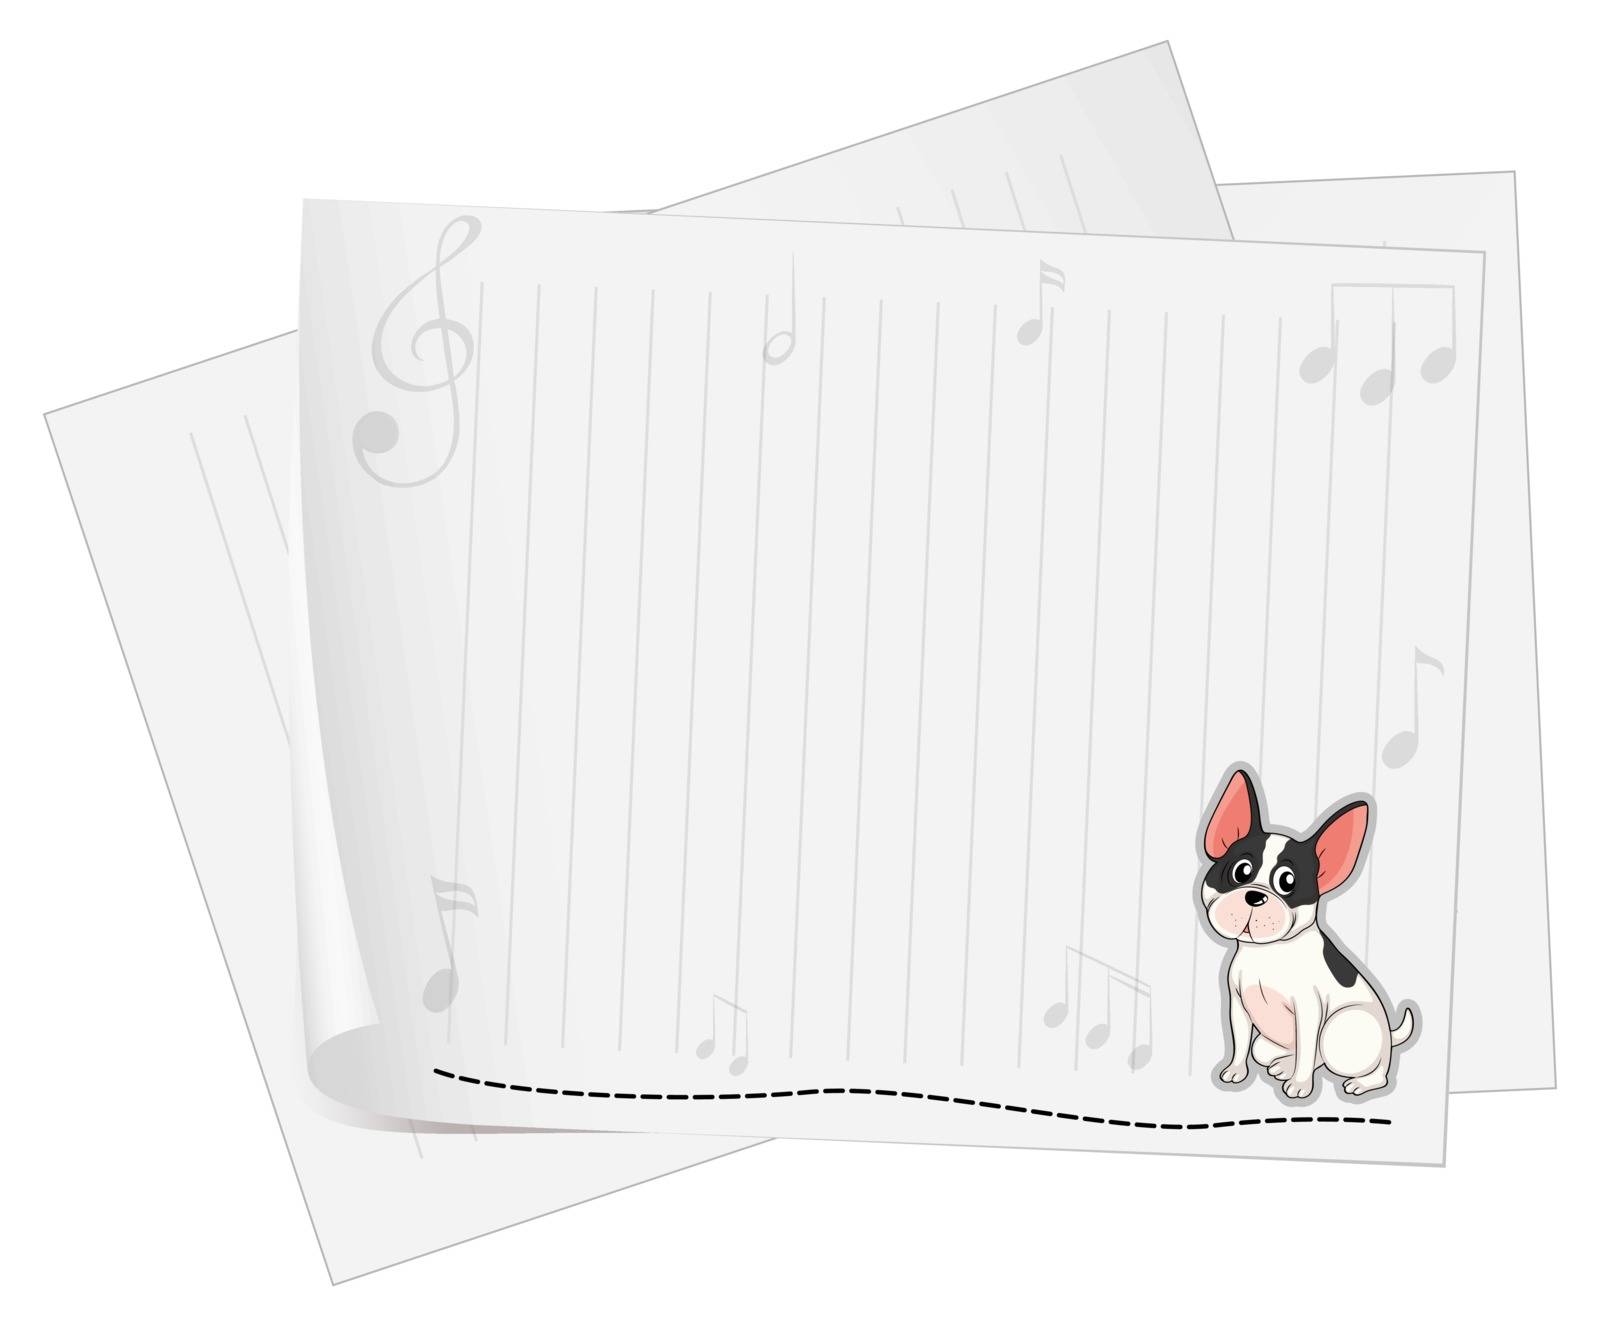 Illustration of a dog printed on a white paper with musical notes on a white background